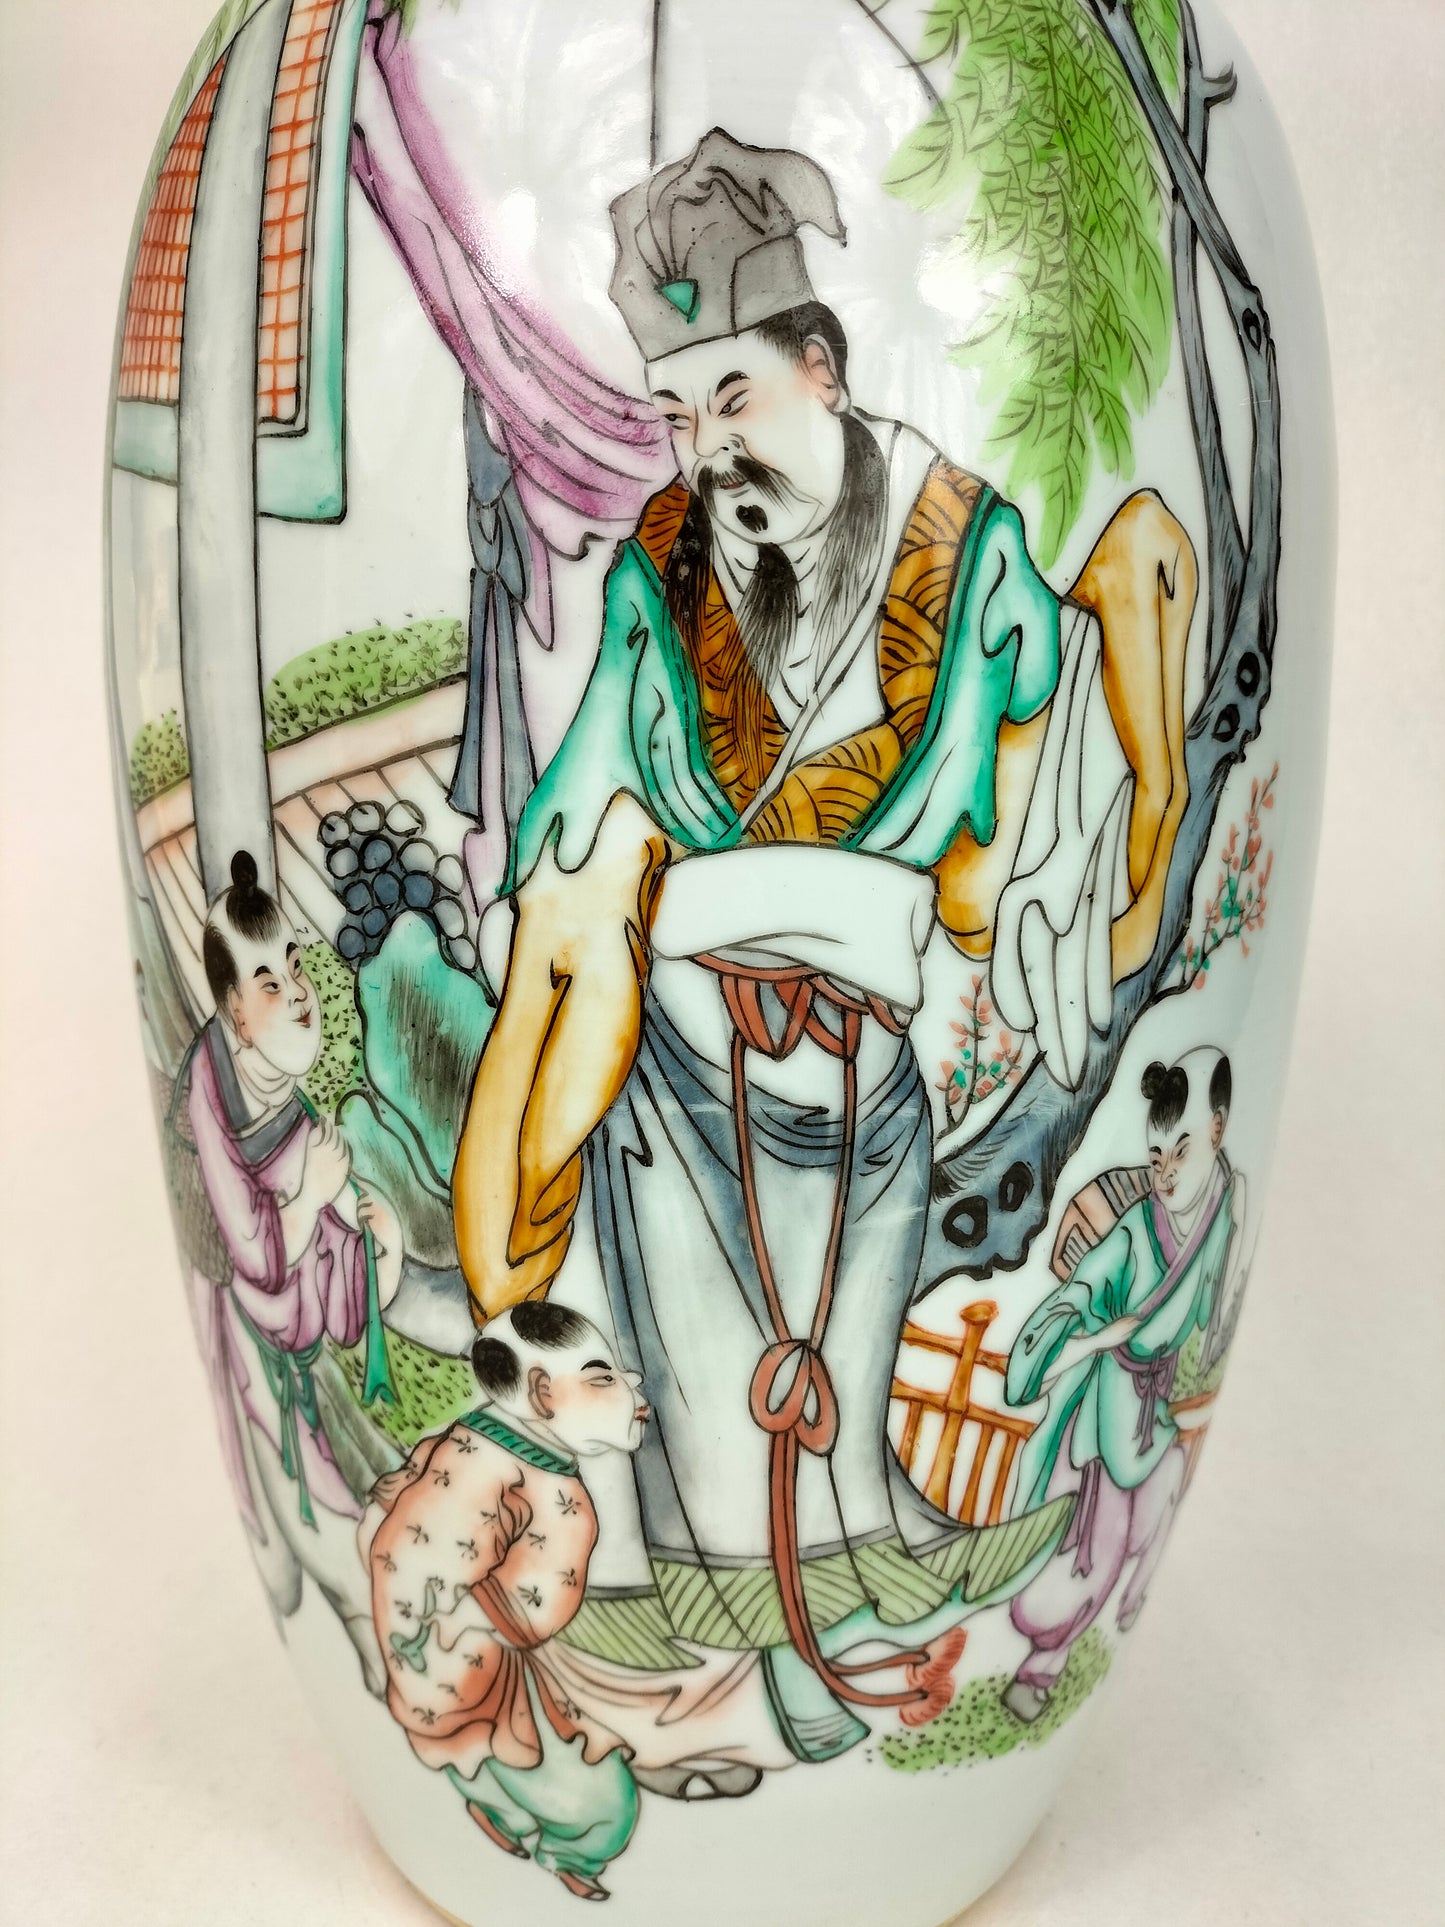 Large antique Chinese vase decorated with sages and children // Republic Period (1912-1949)